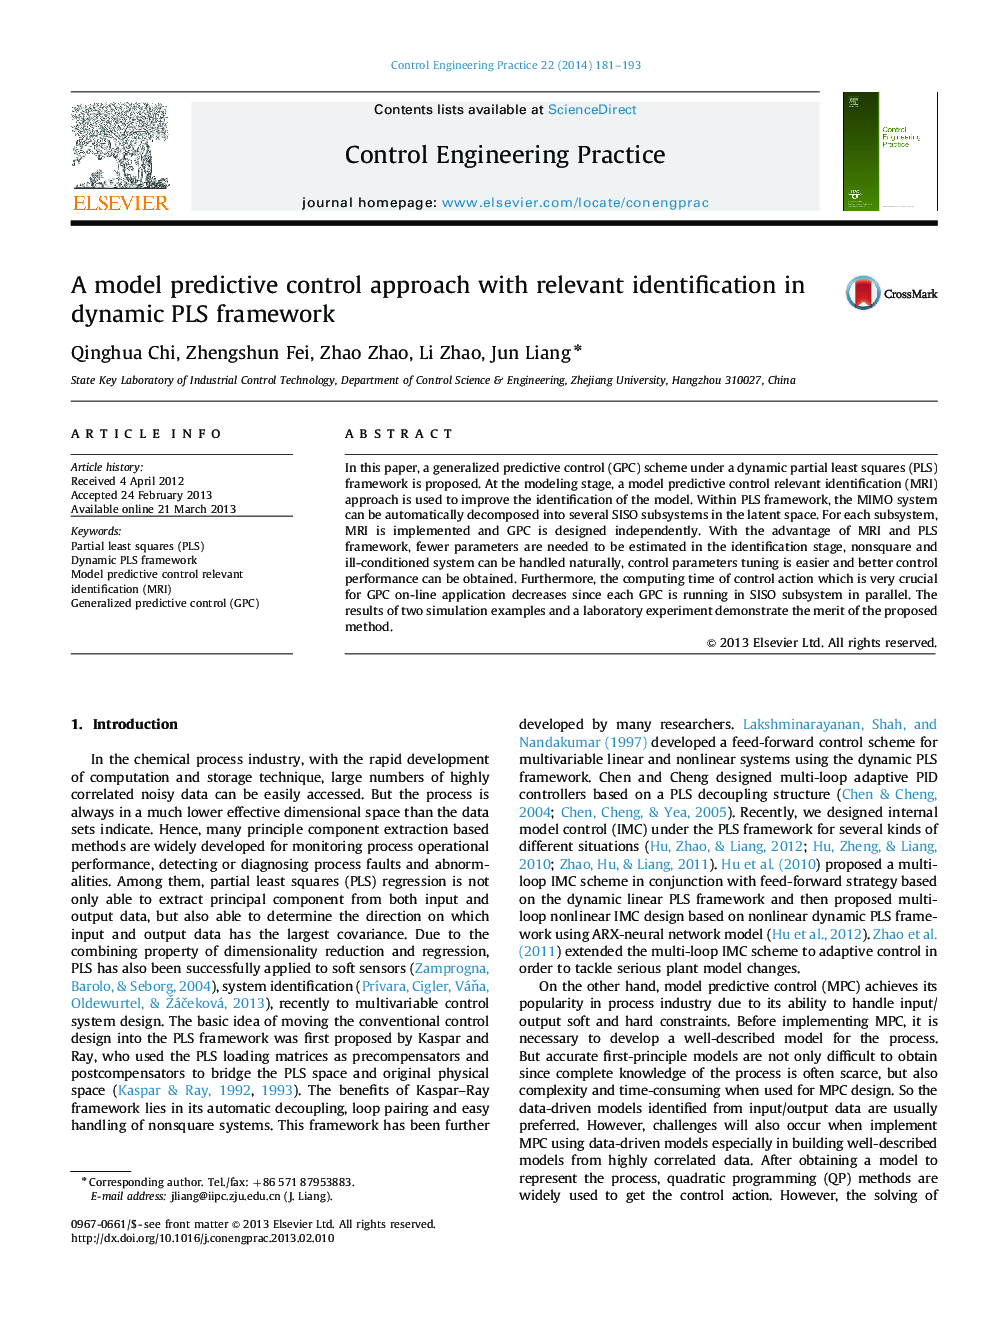 A model predictive control approach with relevant identification in dynamic PLS framework